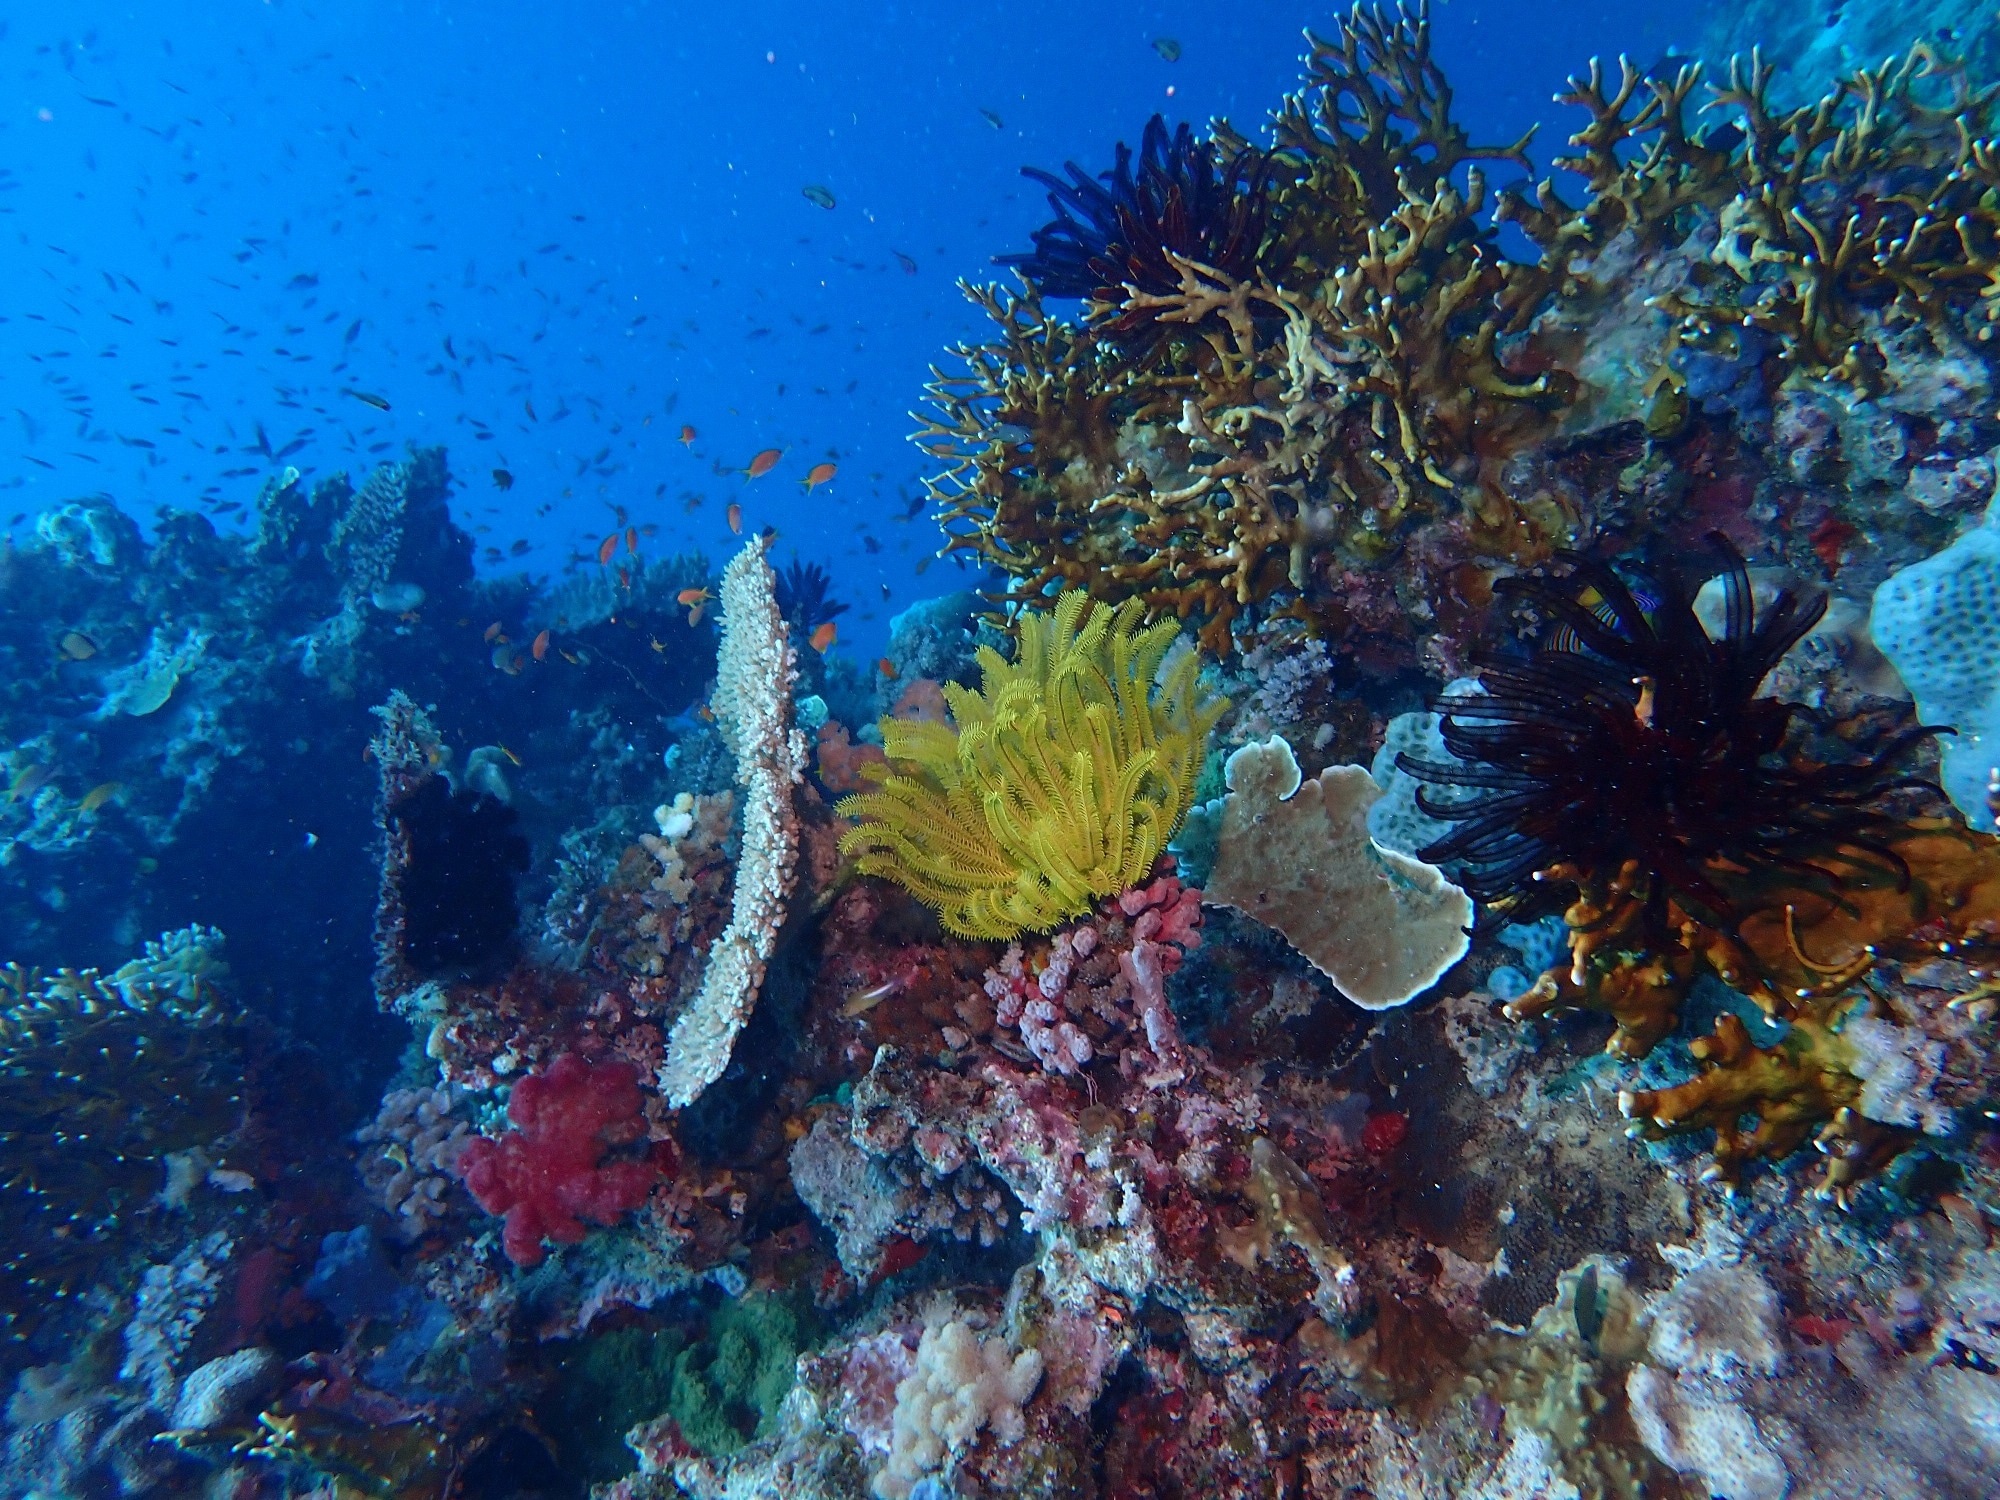 15 Issues That Could Greatly Impact Marine and Coastal Biodiversity